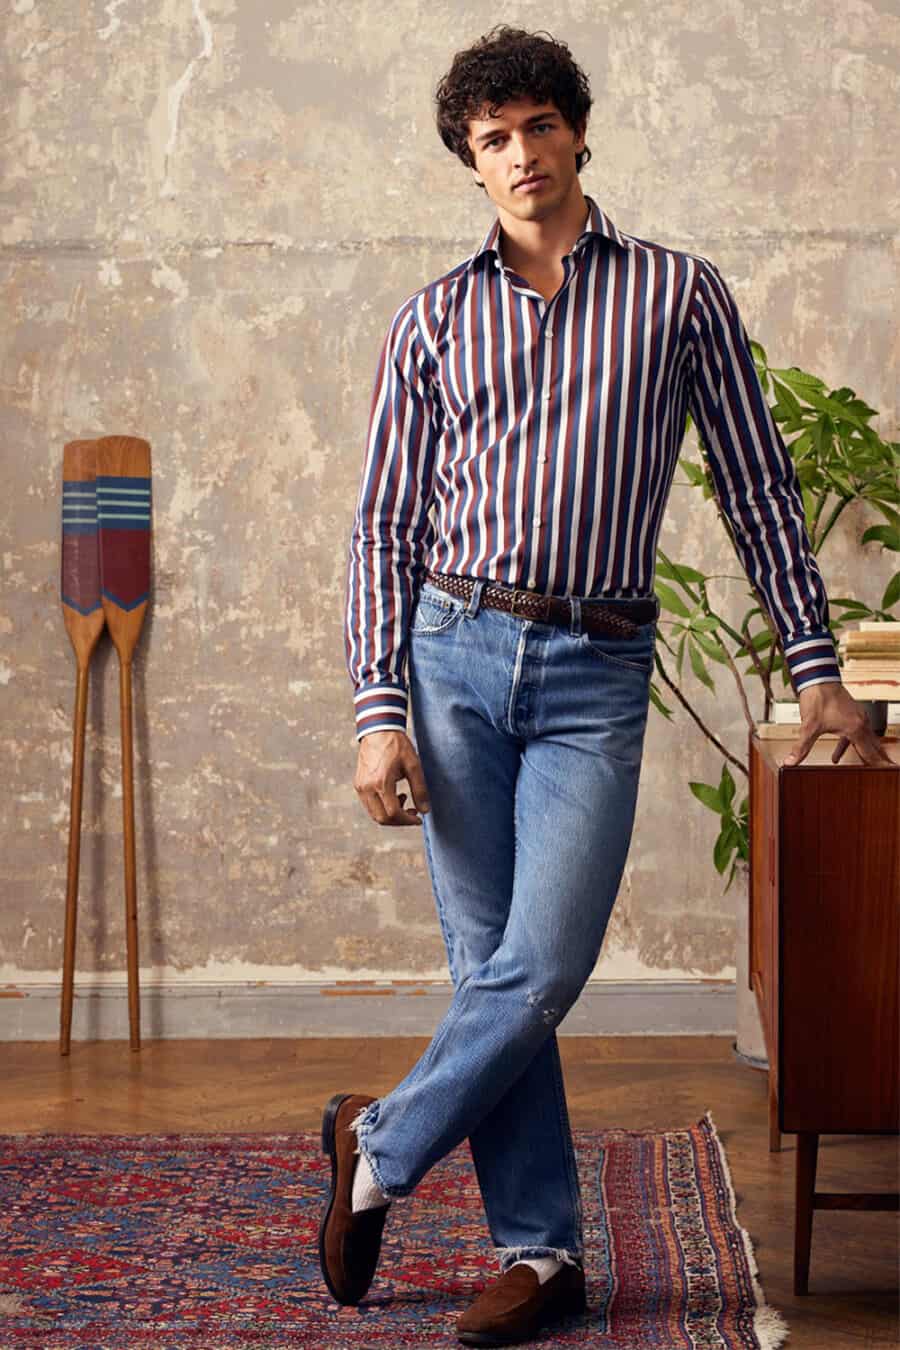 Men's mid-wash jeans, tucked in red/white/blue striped dress shirt, brown woven leather belt, brown suede loafers and white socks outfit